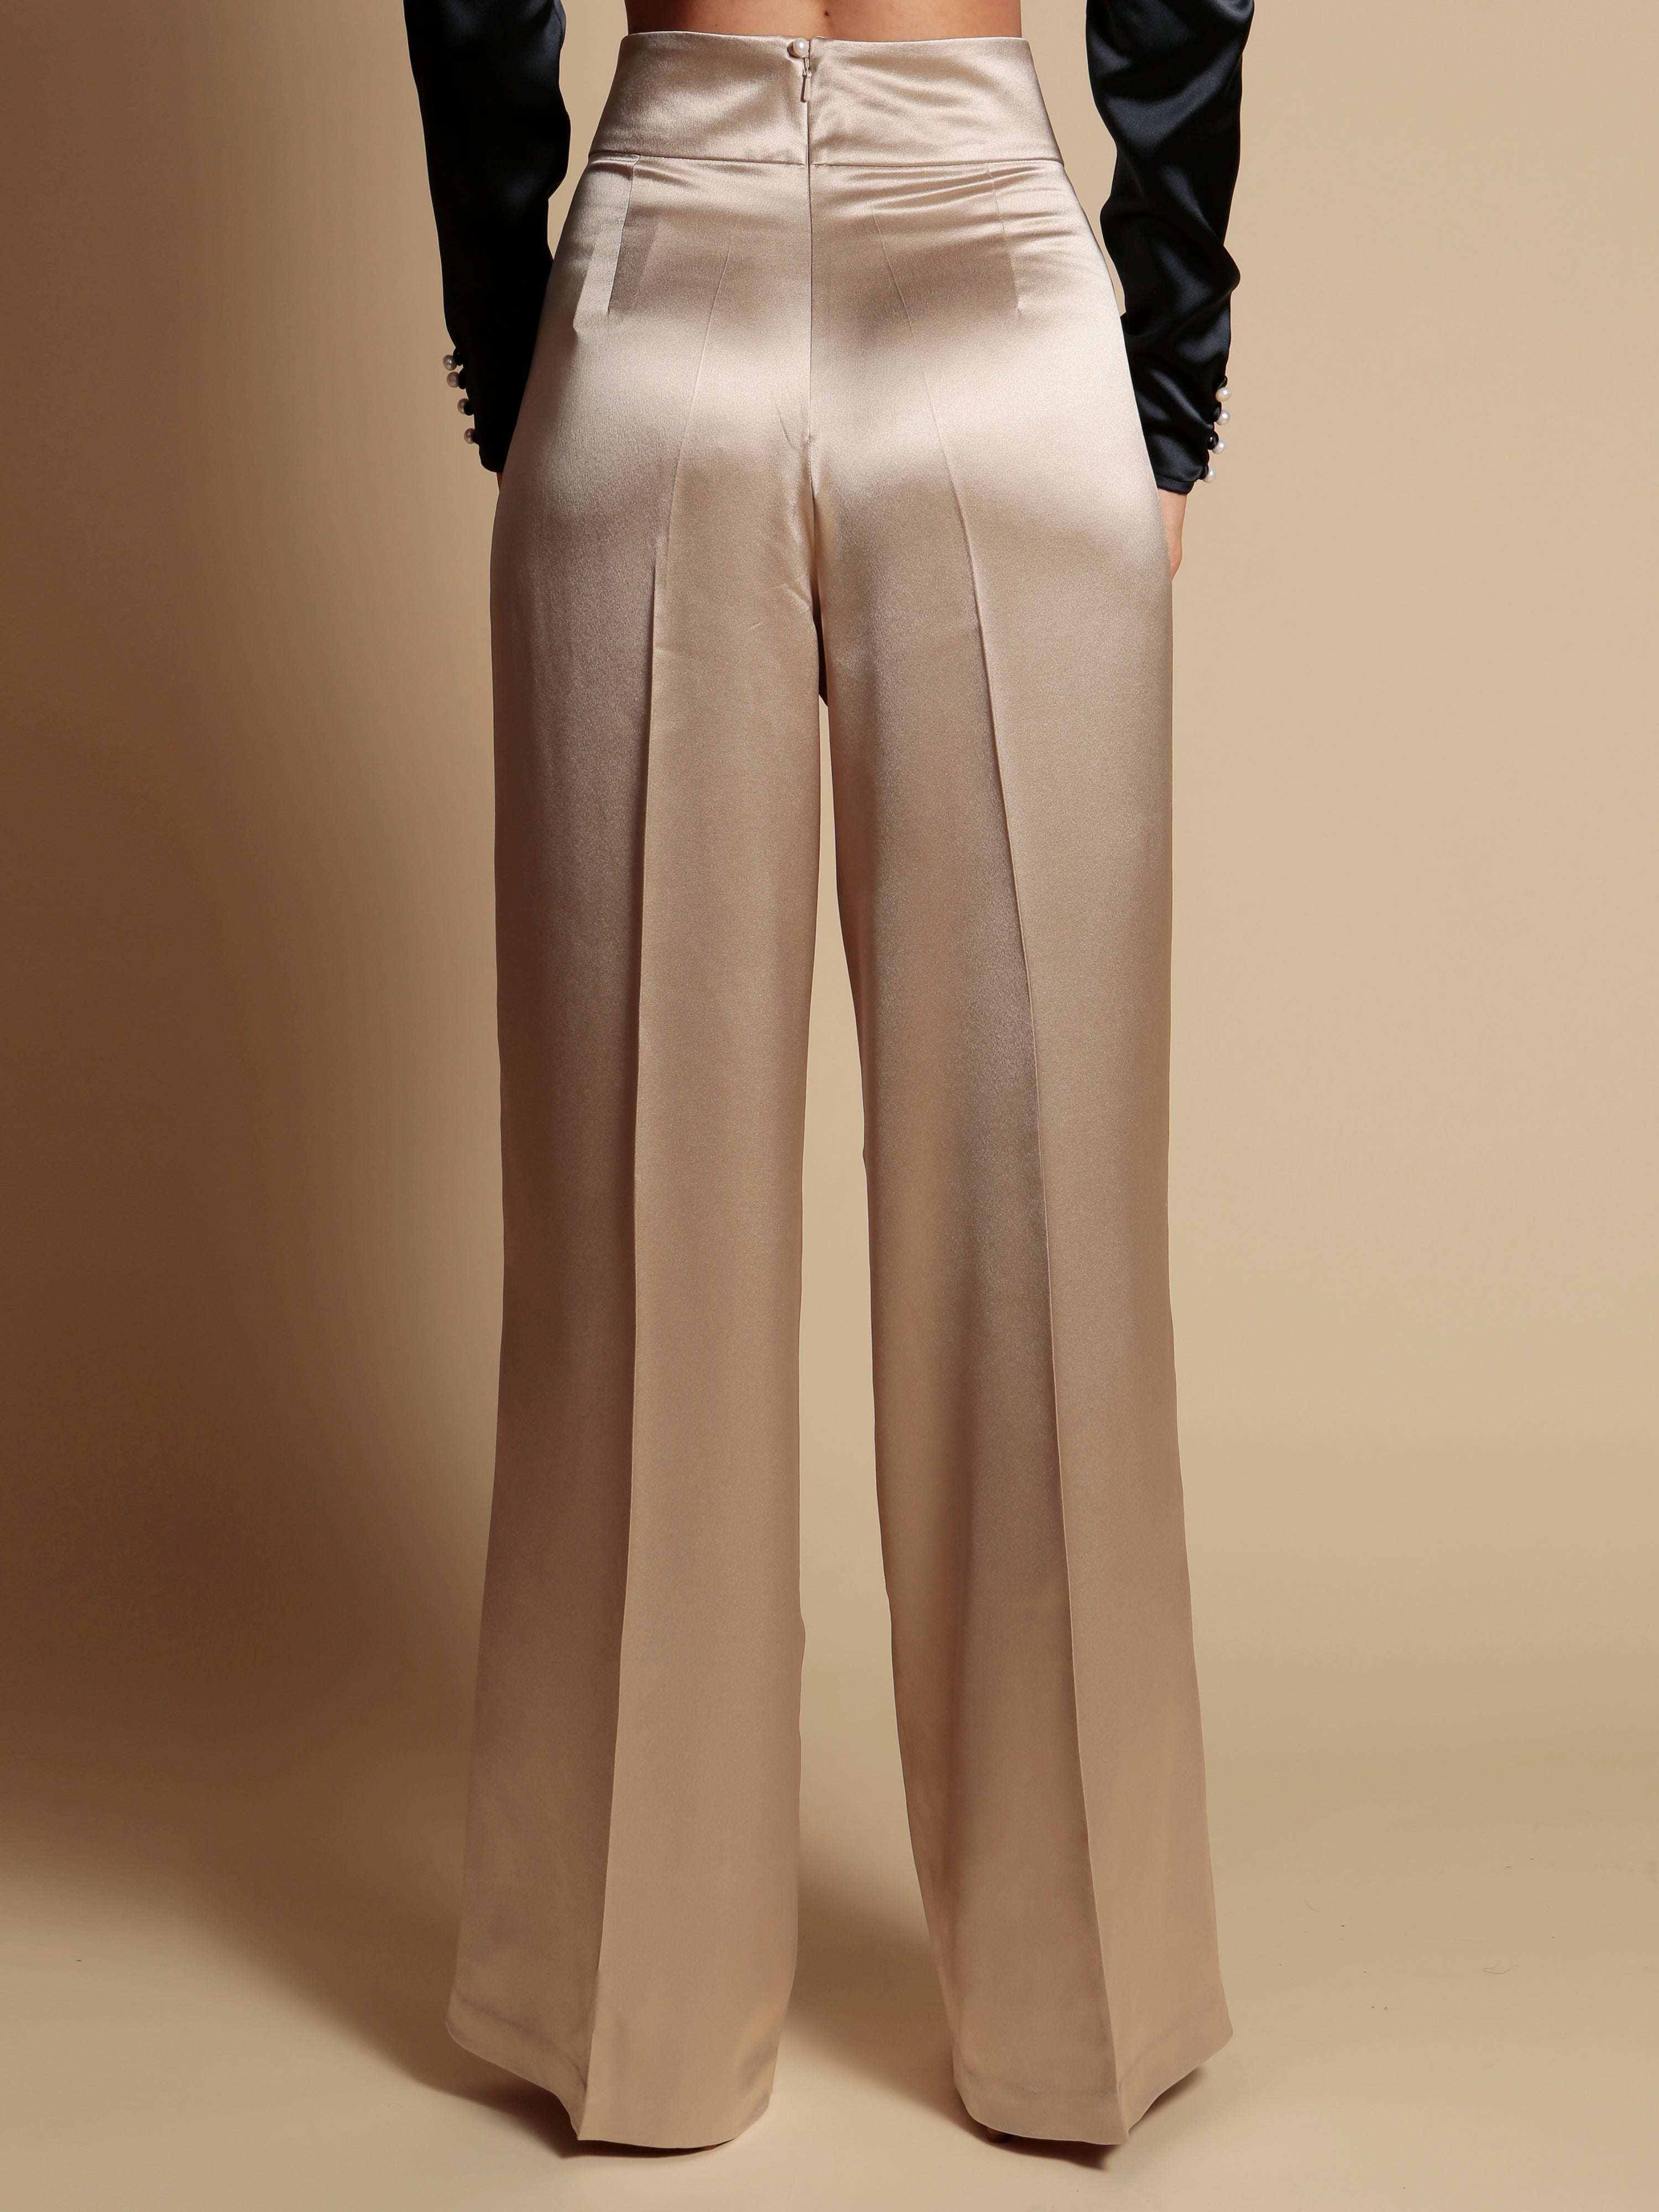 LIMITED EDITION 'Jolie' Heavy Silk Palazzo Trousers in Ostrica